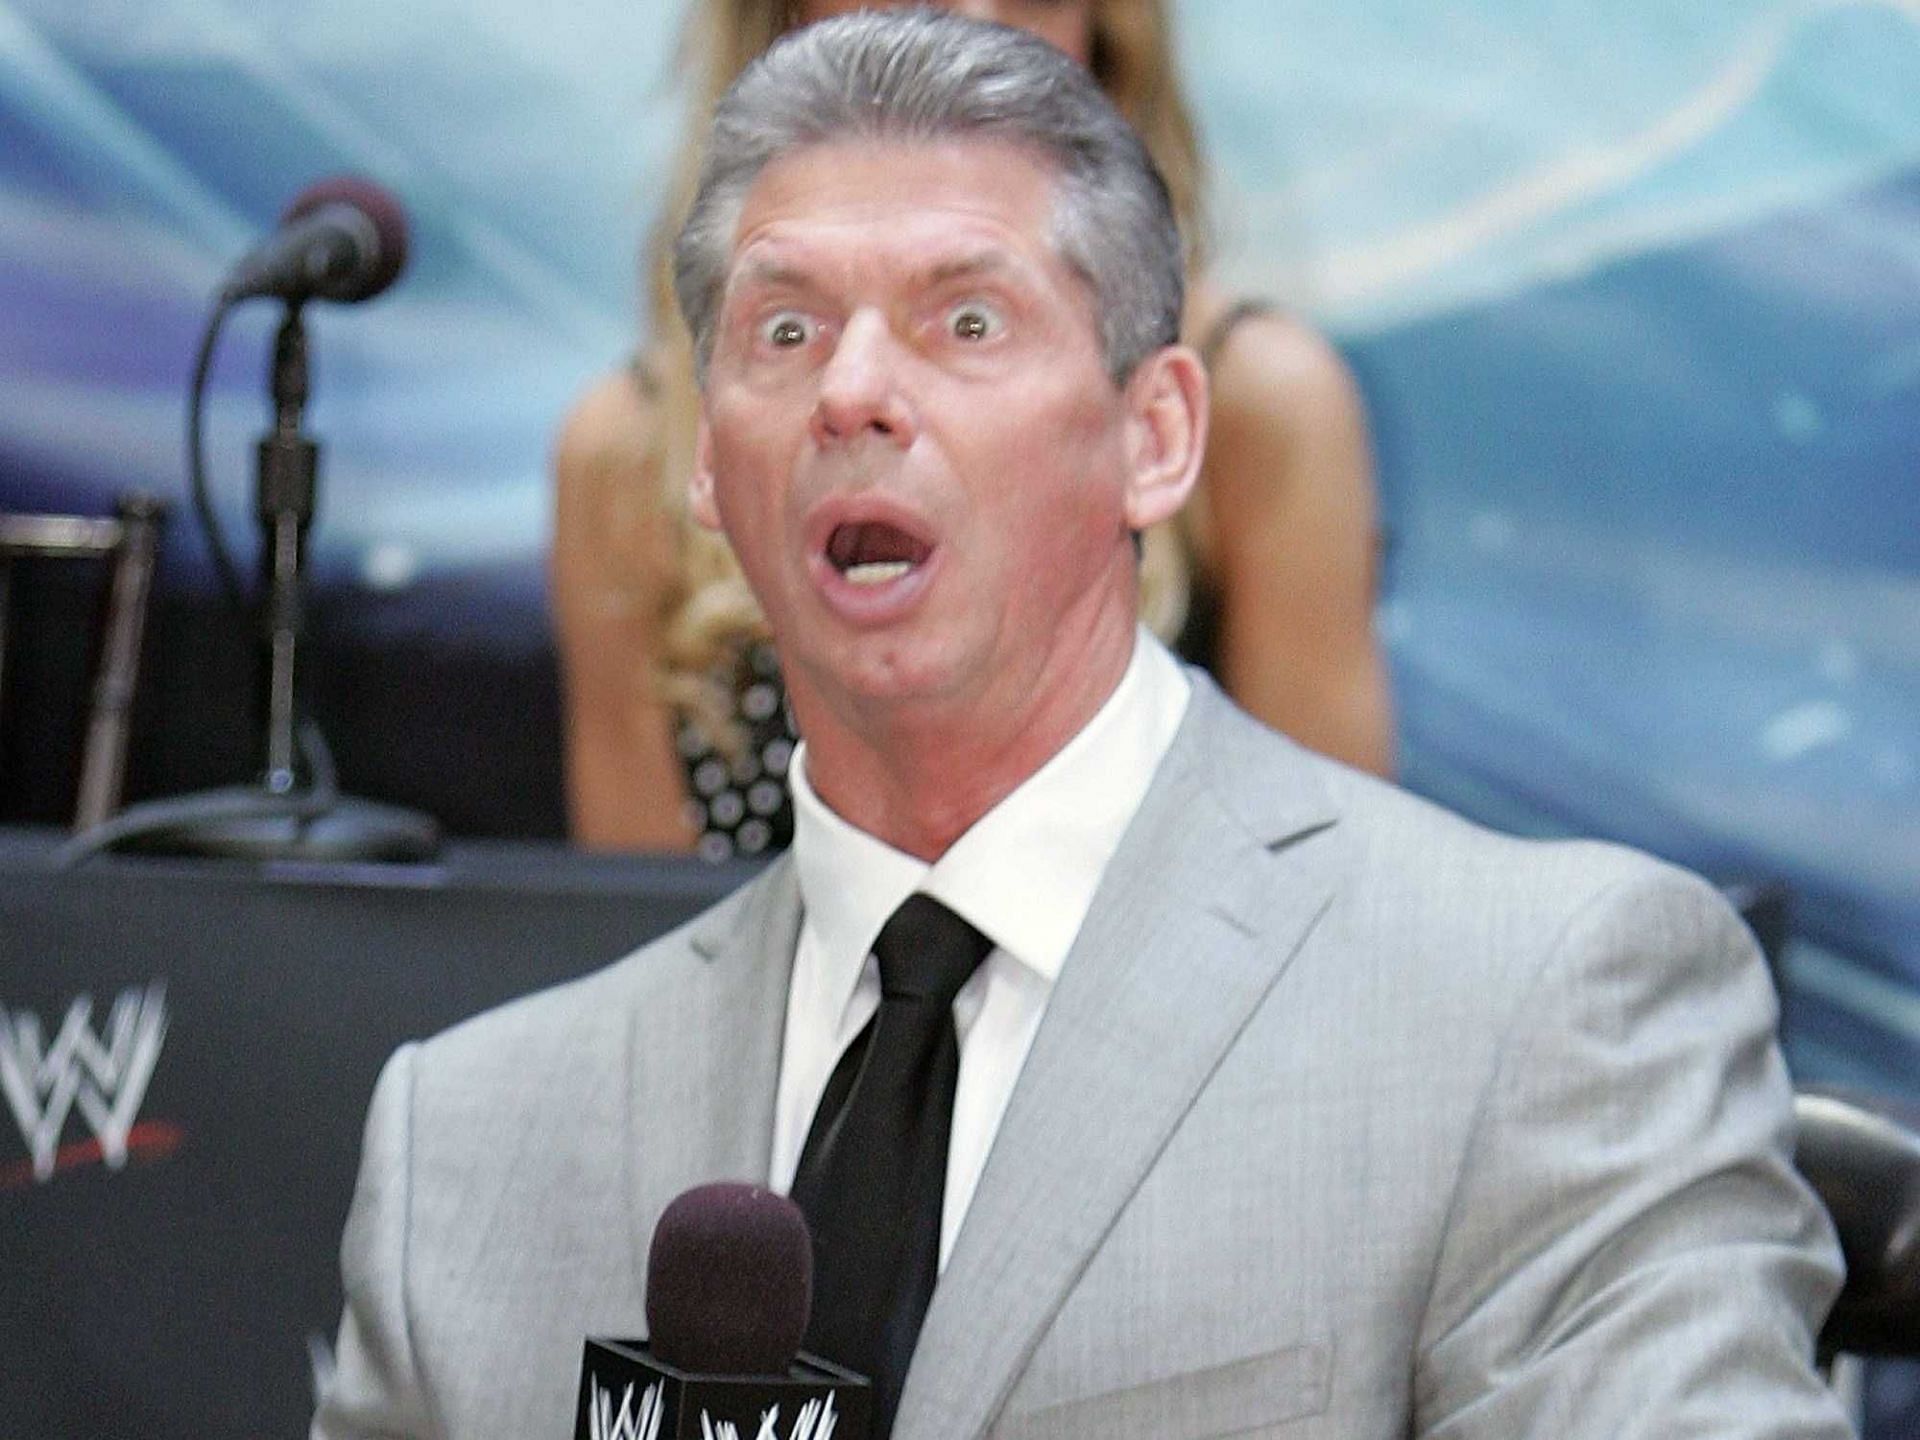 Vince McMahon stepped down as the Chairman of WWE